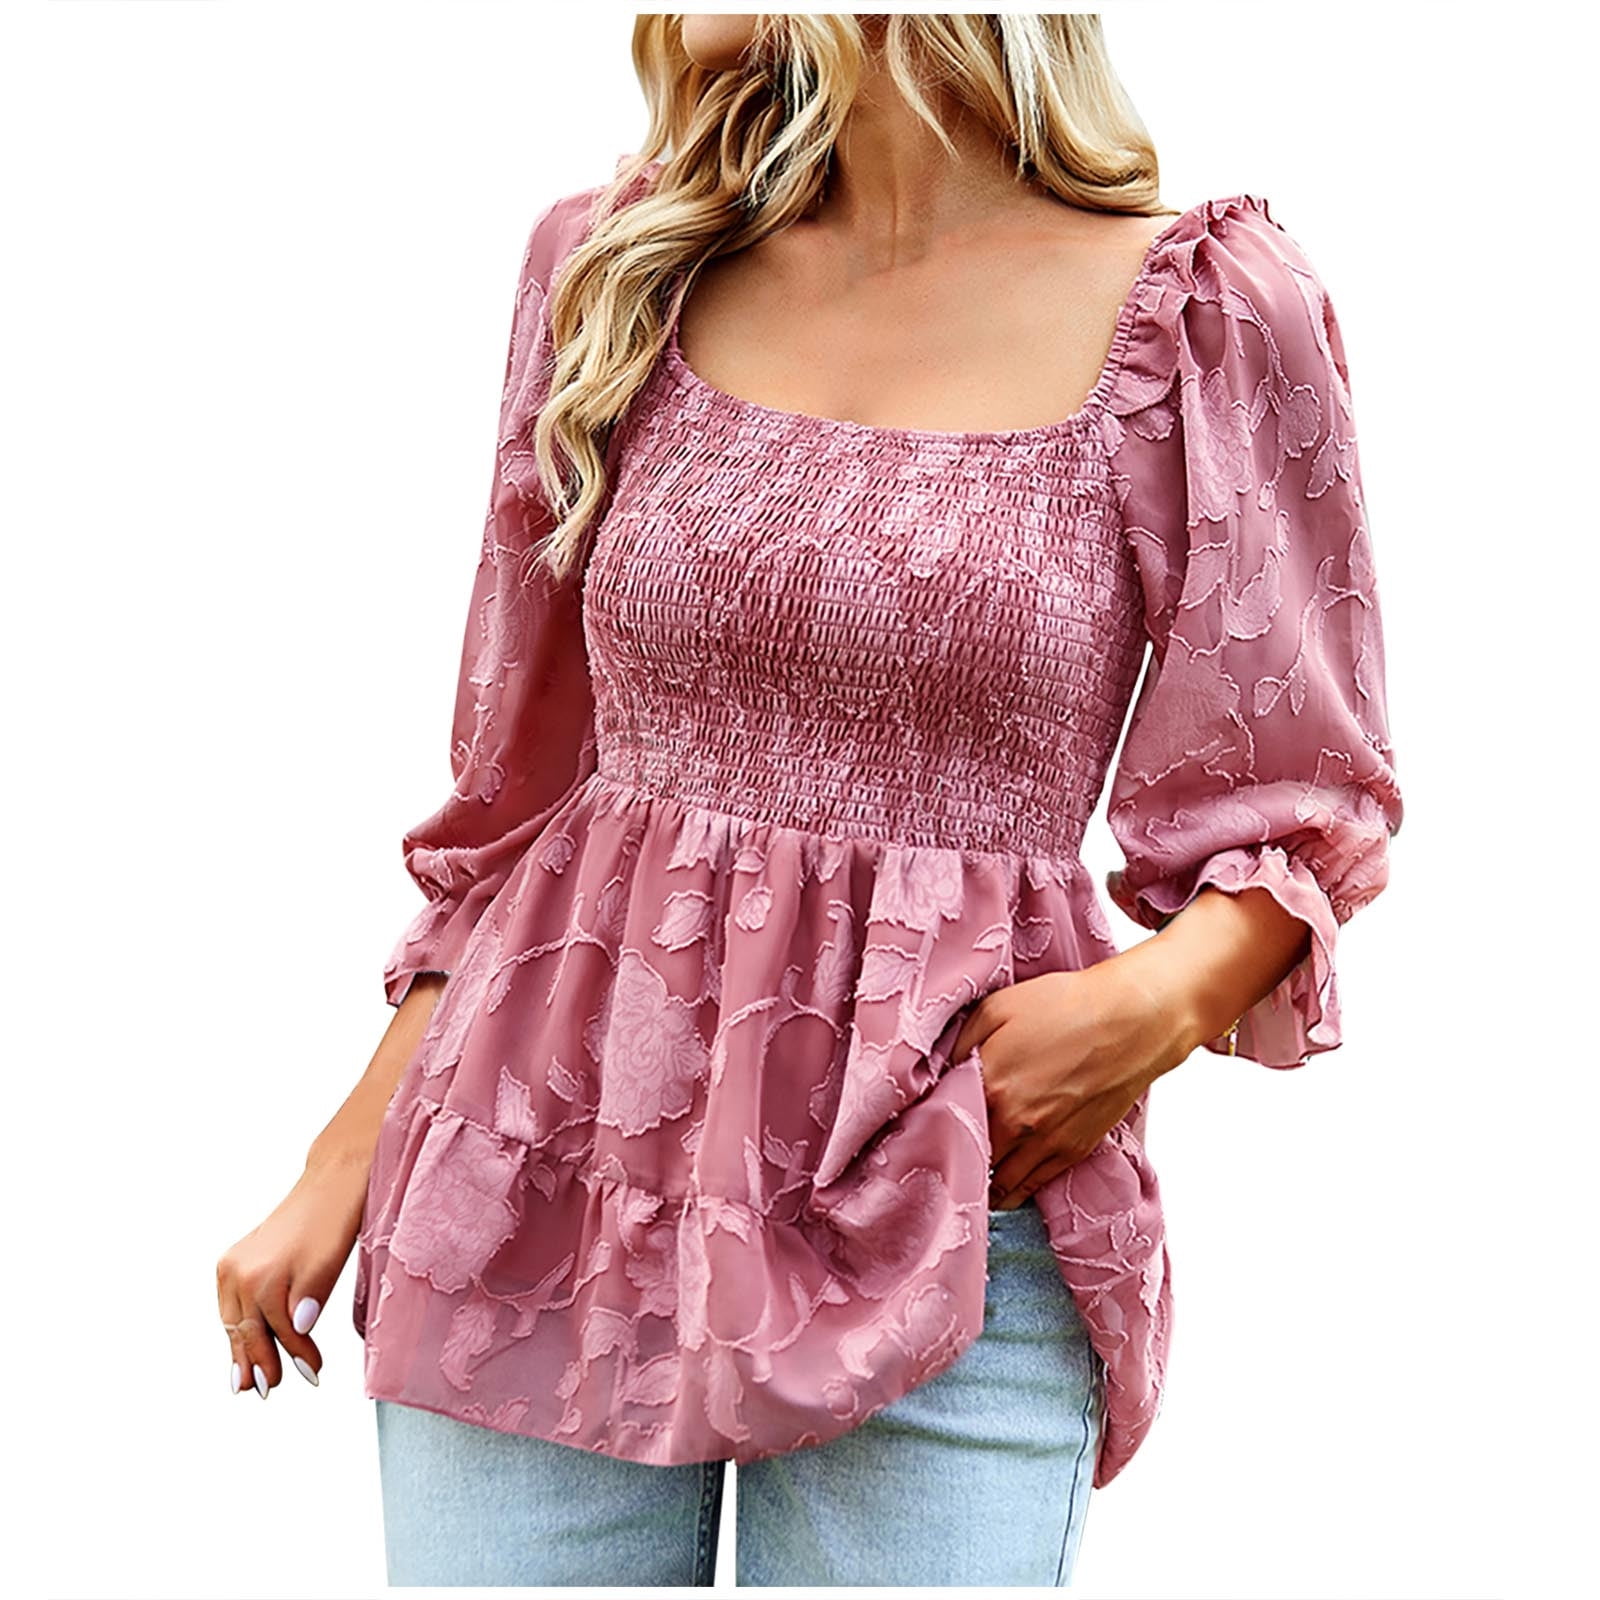 Hfyihgf Women's Summer Square Neck Smocked Babydoll Tops 3/4 Puff Sleeve  Loose Lace Chiffon Blouse Floral Textured Shirts Pink M